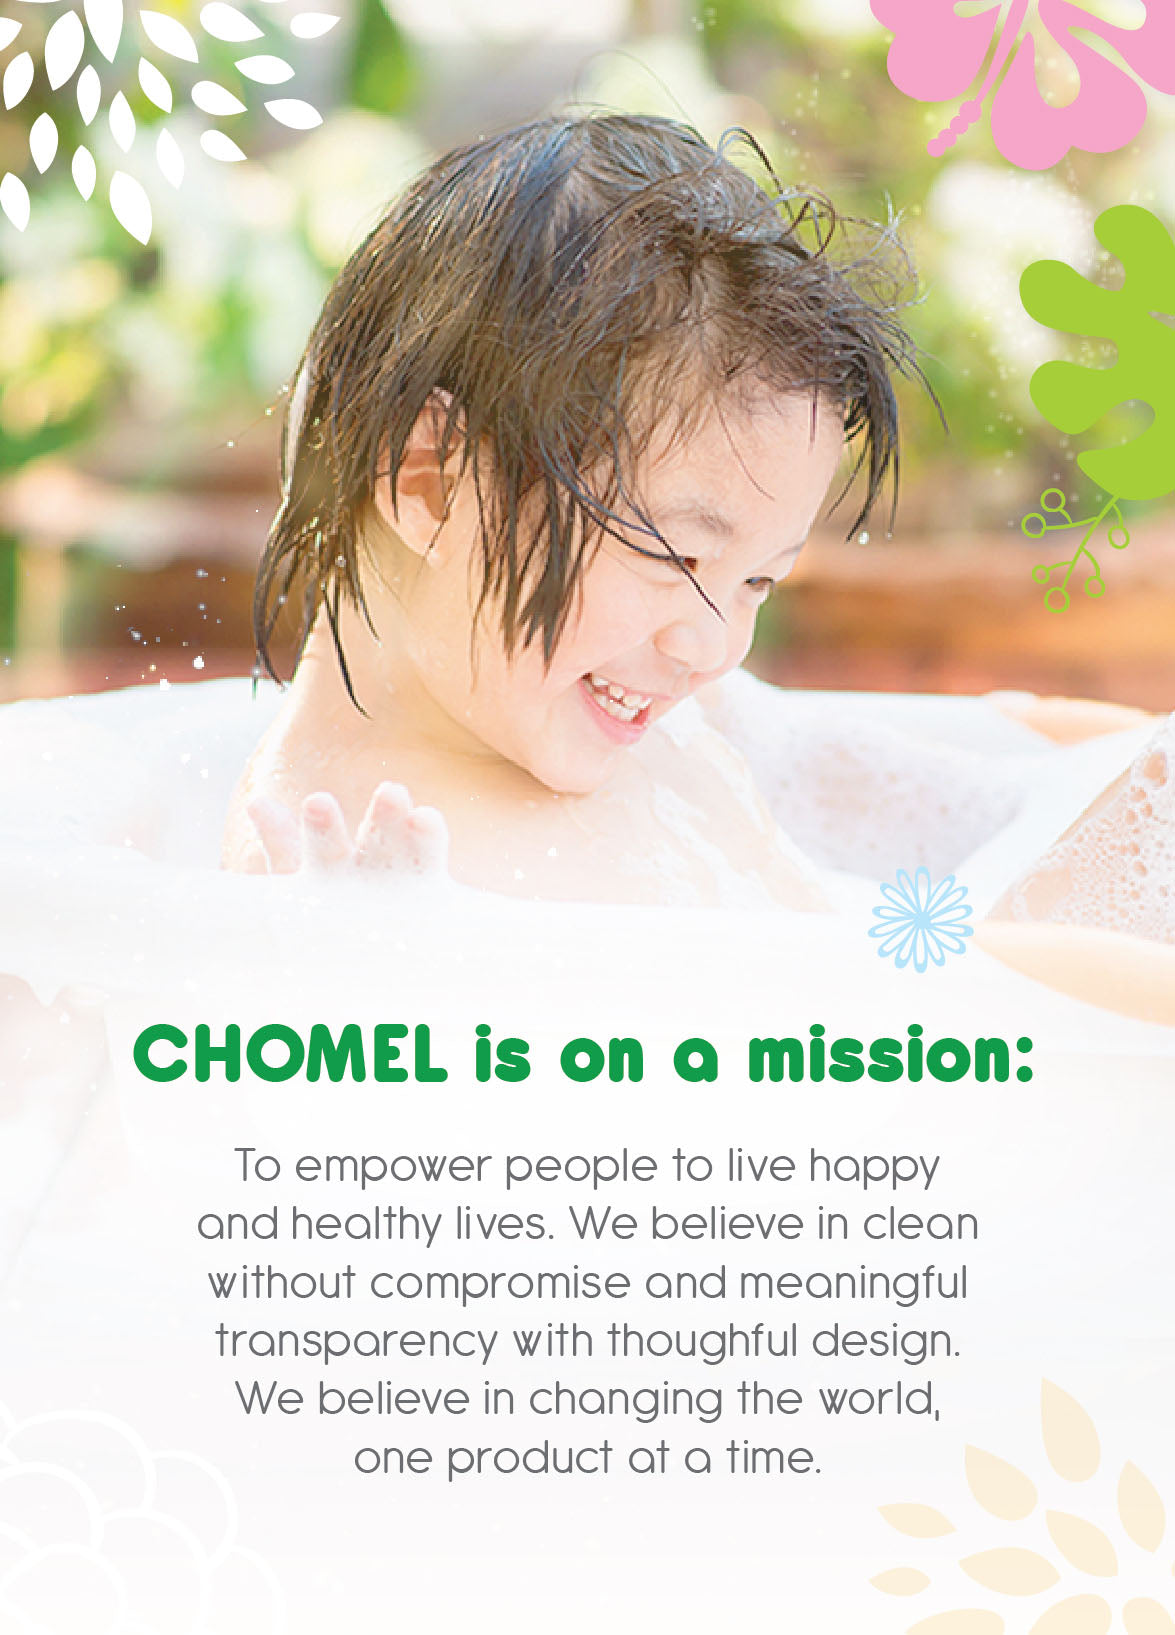 Chomel is on mission